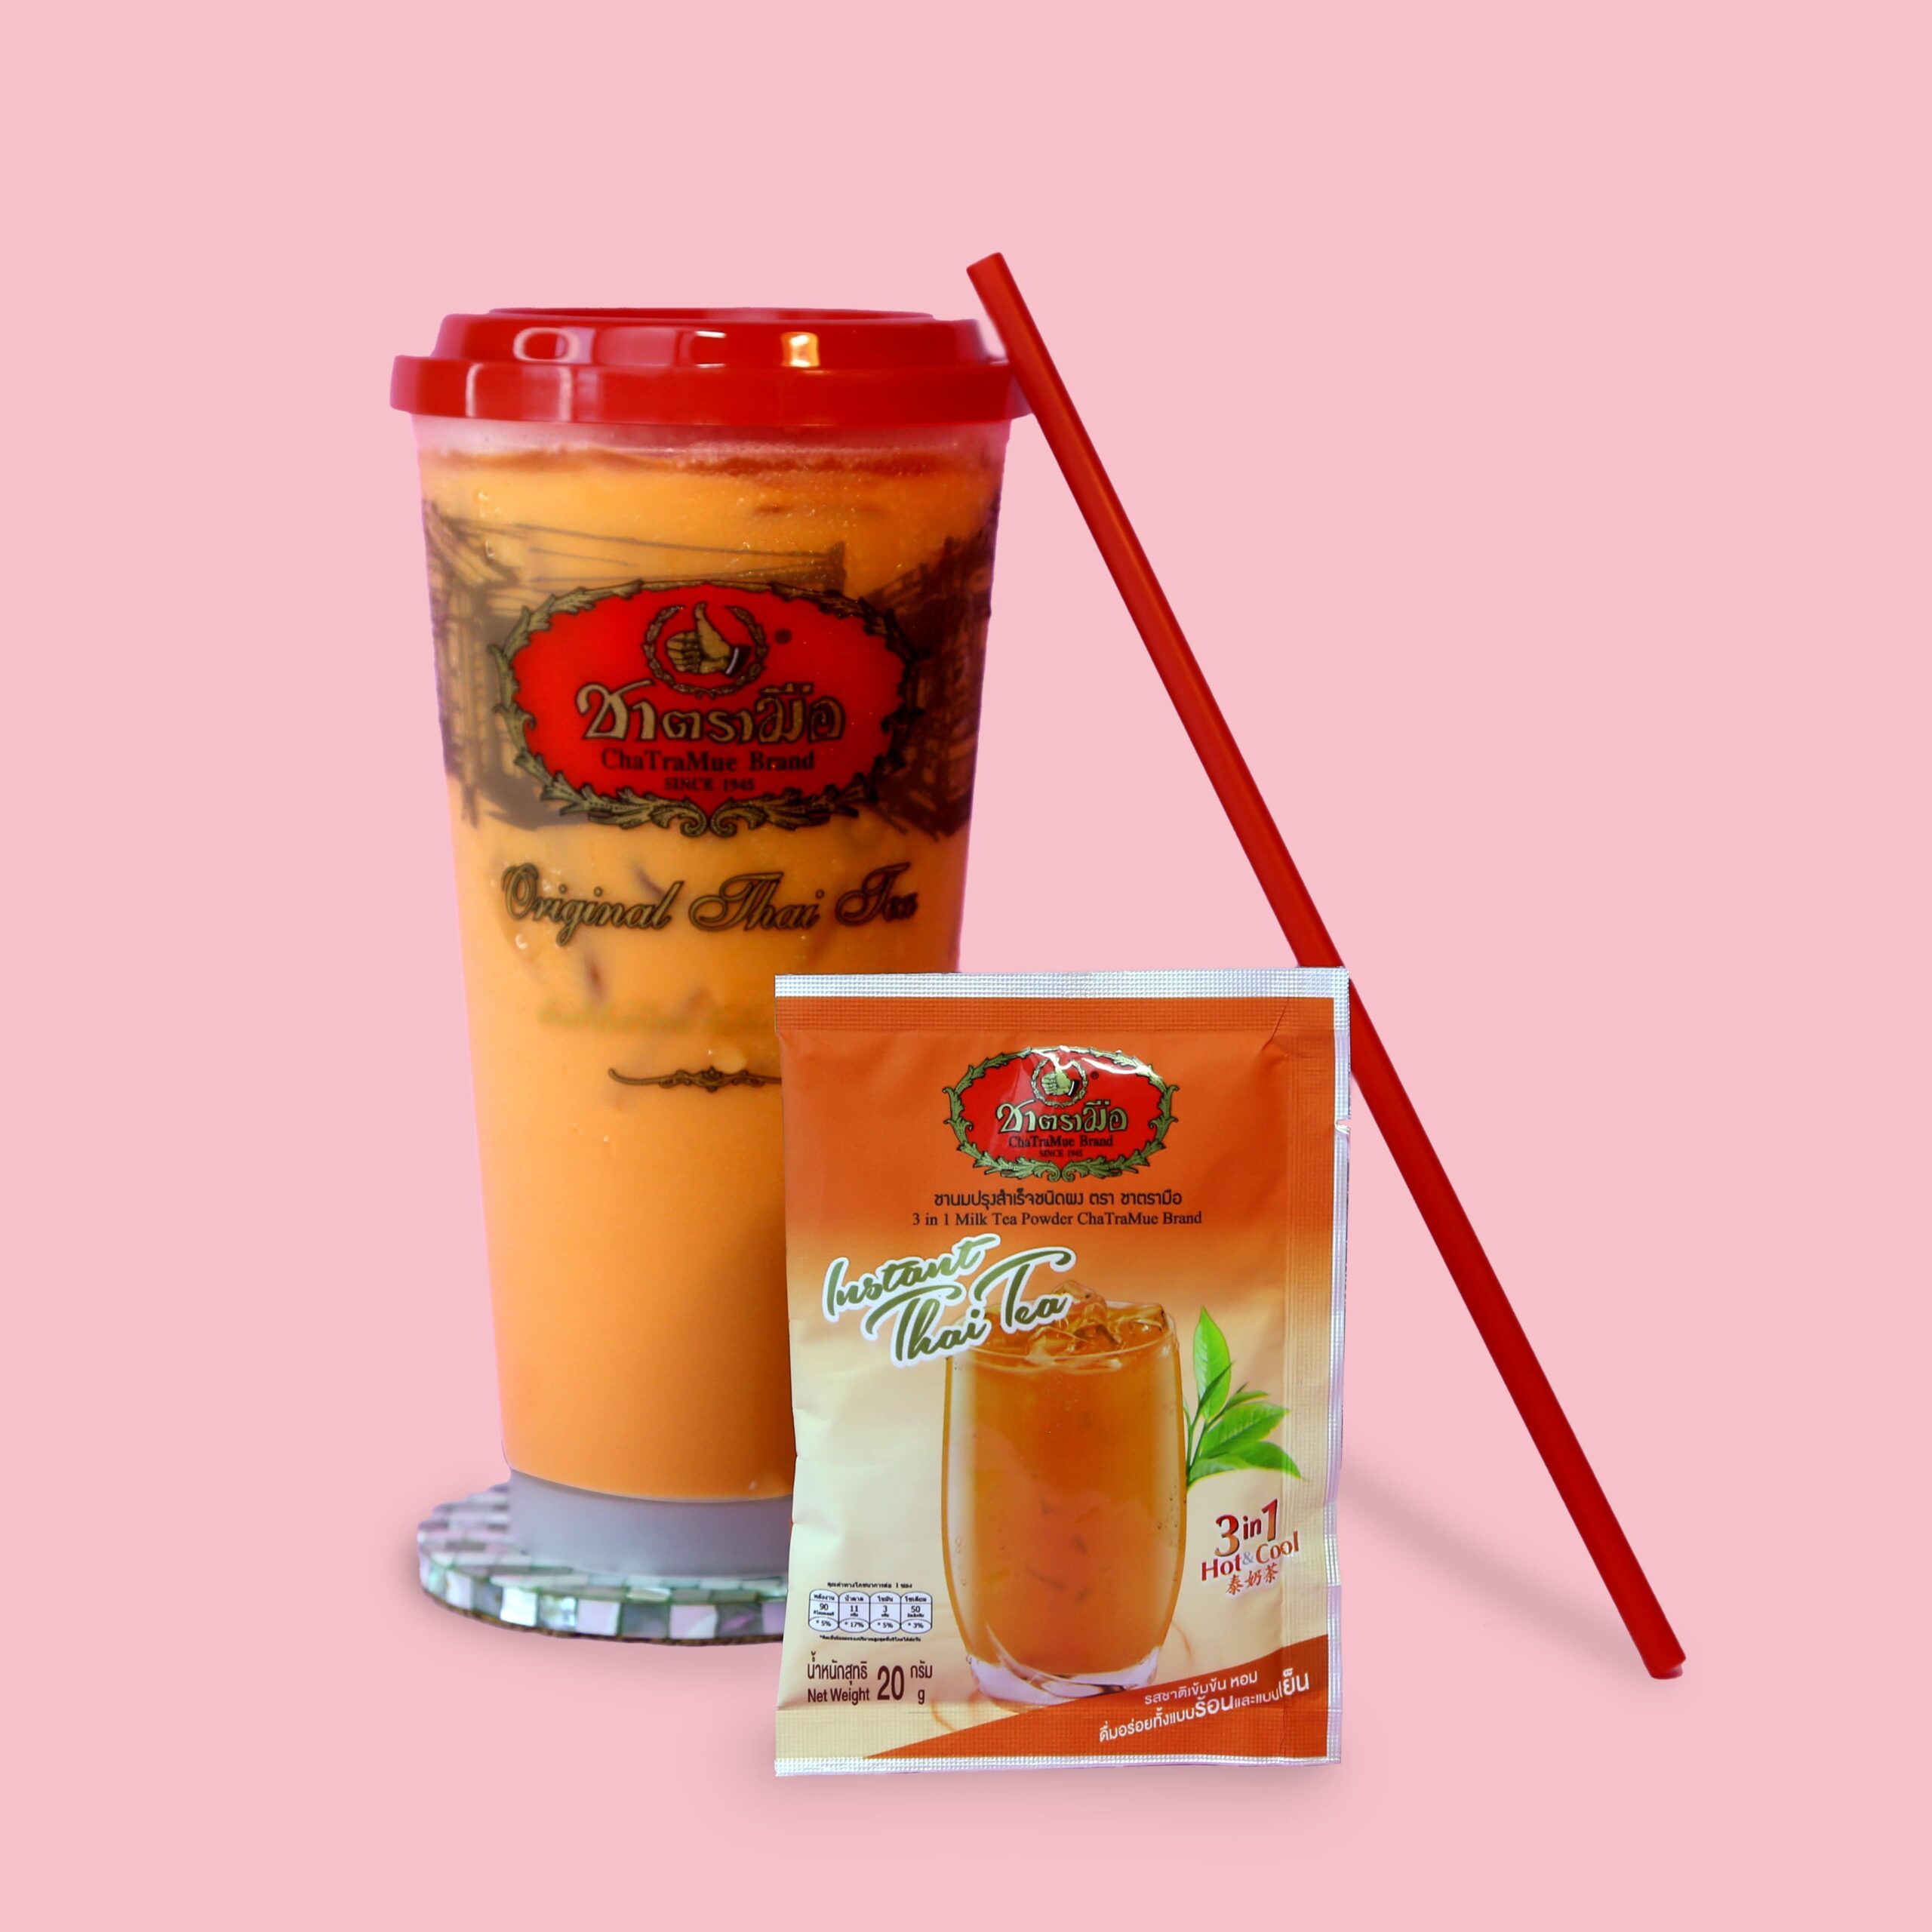 Cha tra Mue Instant Thai milk tea 3 in 1 included in Heap Brand authentic Thai snack subscription box. Famous Thai souvenir and local favorite drink